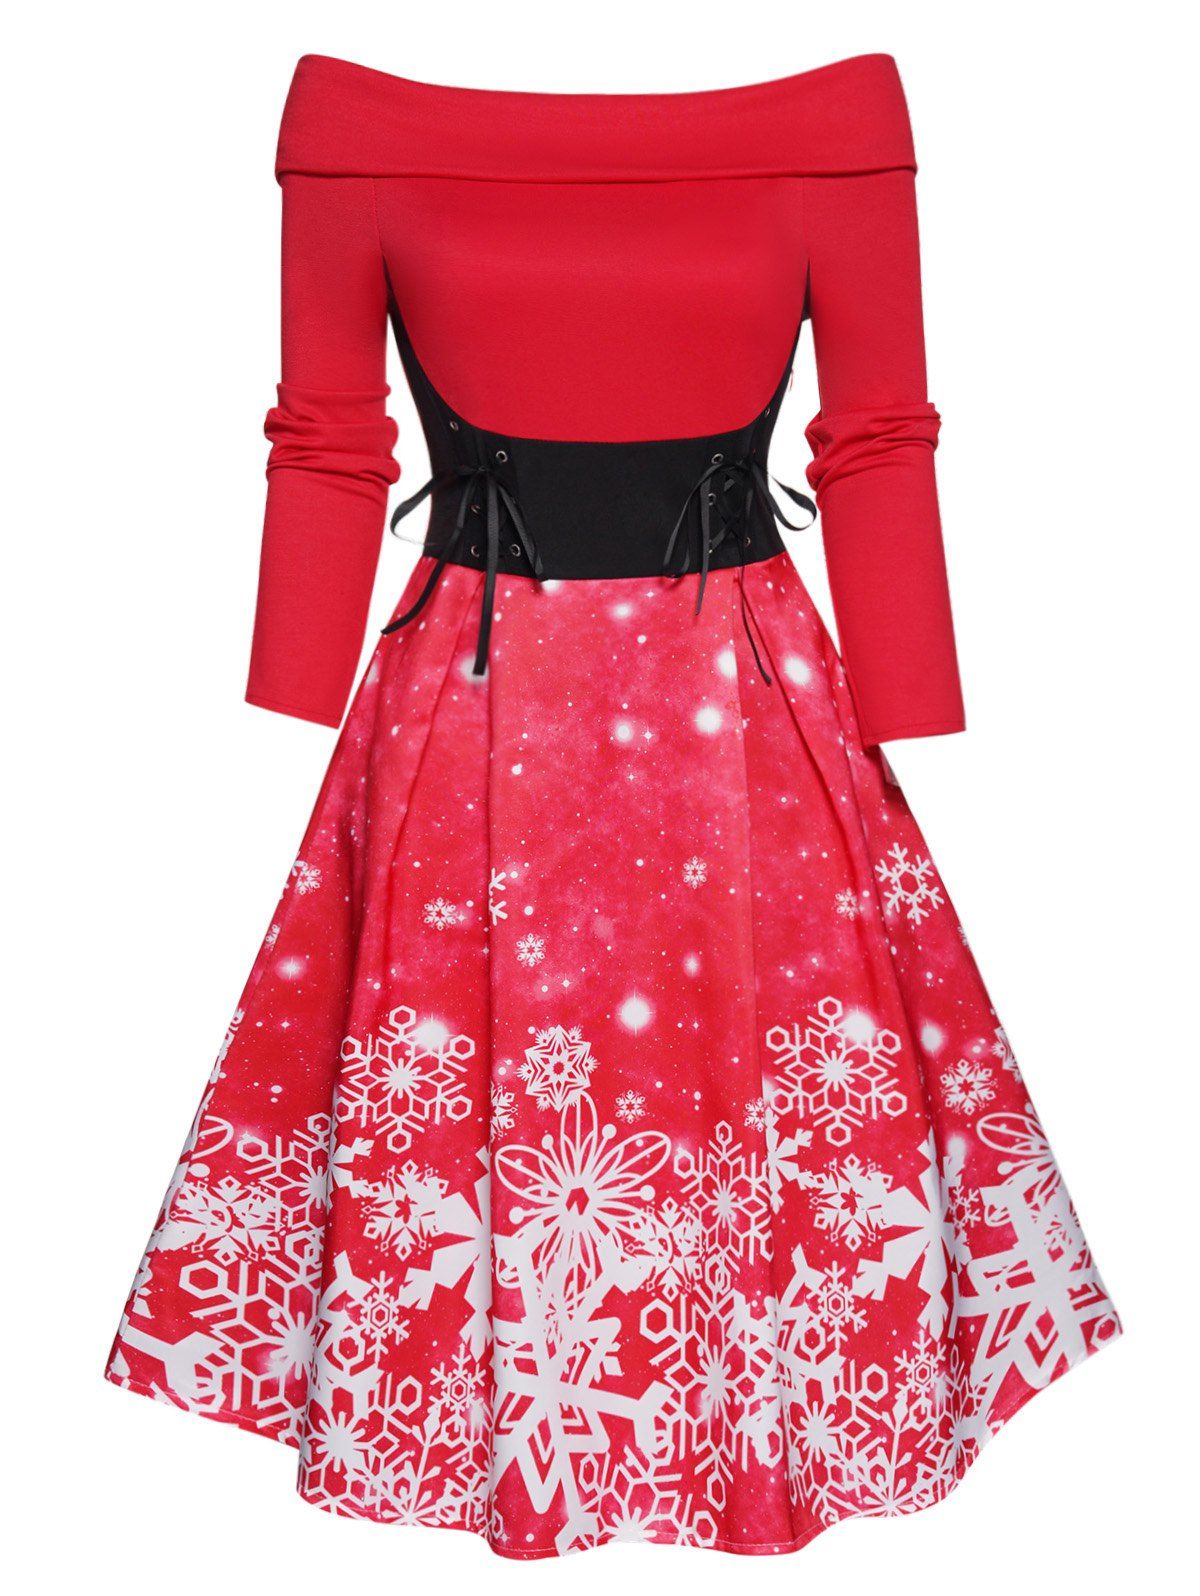 Christmas Dress Off The Shoulder Snowflake Print Foldover Lace Up High Waisted A Line Mini Dress - RED S